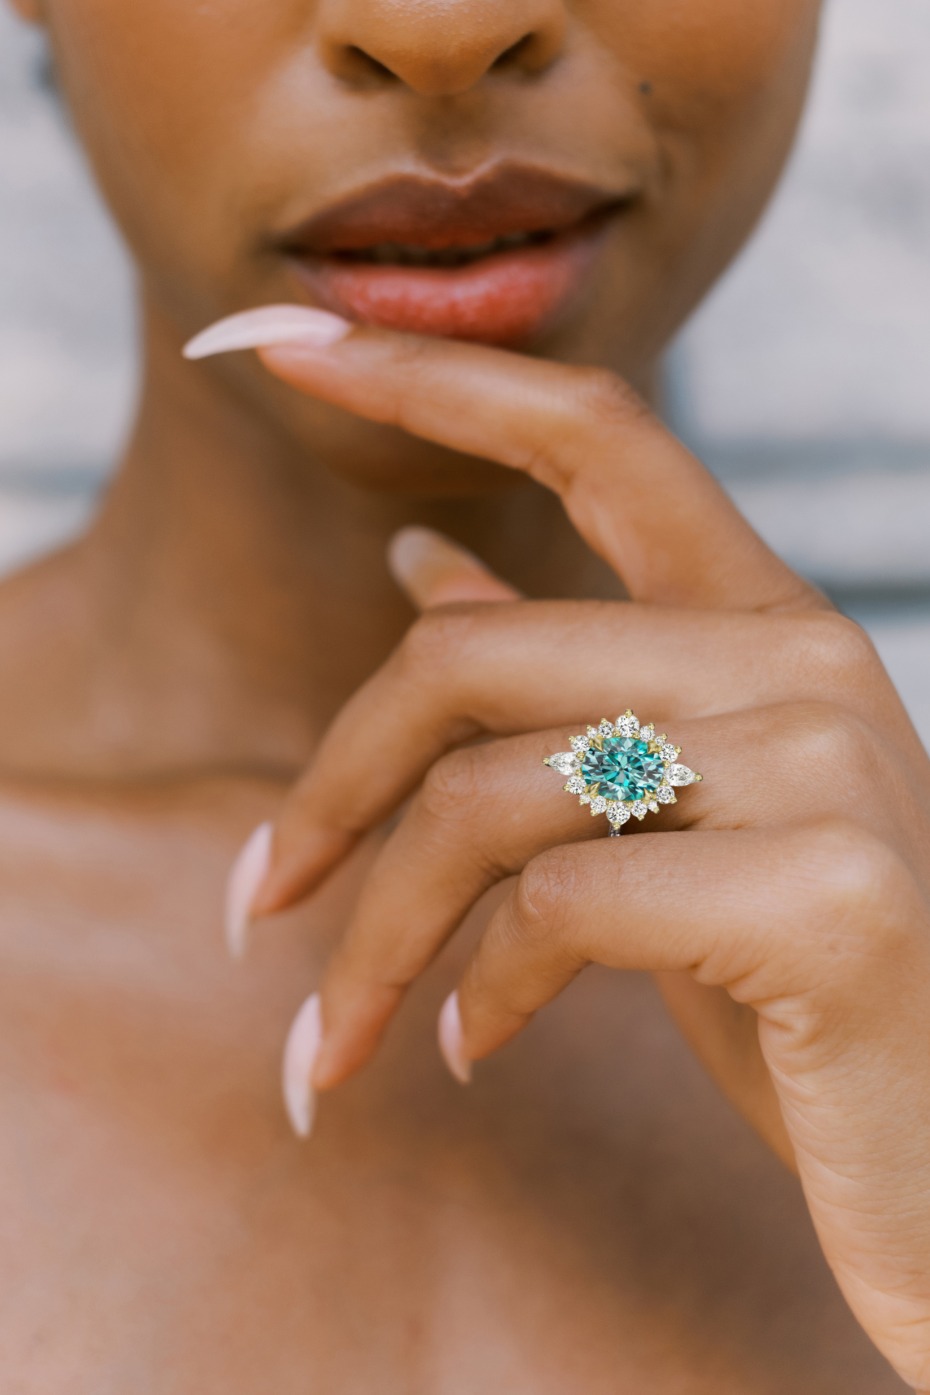 Ethically Made And Straight Up Stunning, We Canât Help But Say Yes To These Engagement Rings By Kristin Coffin